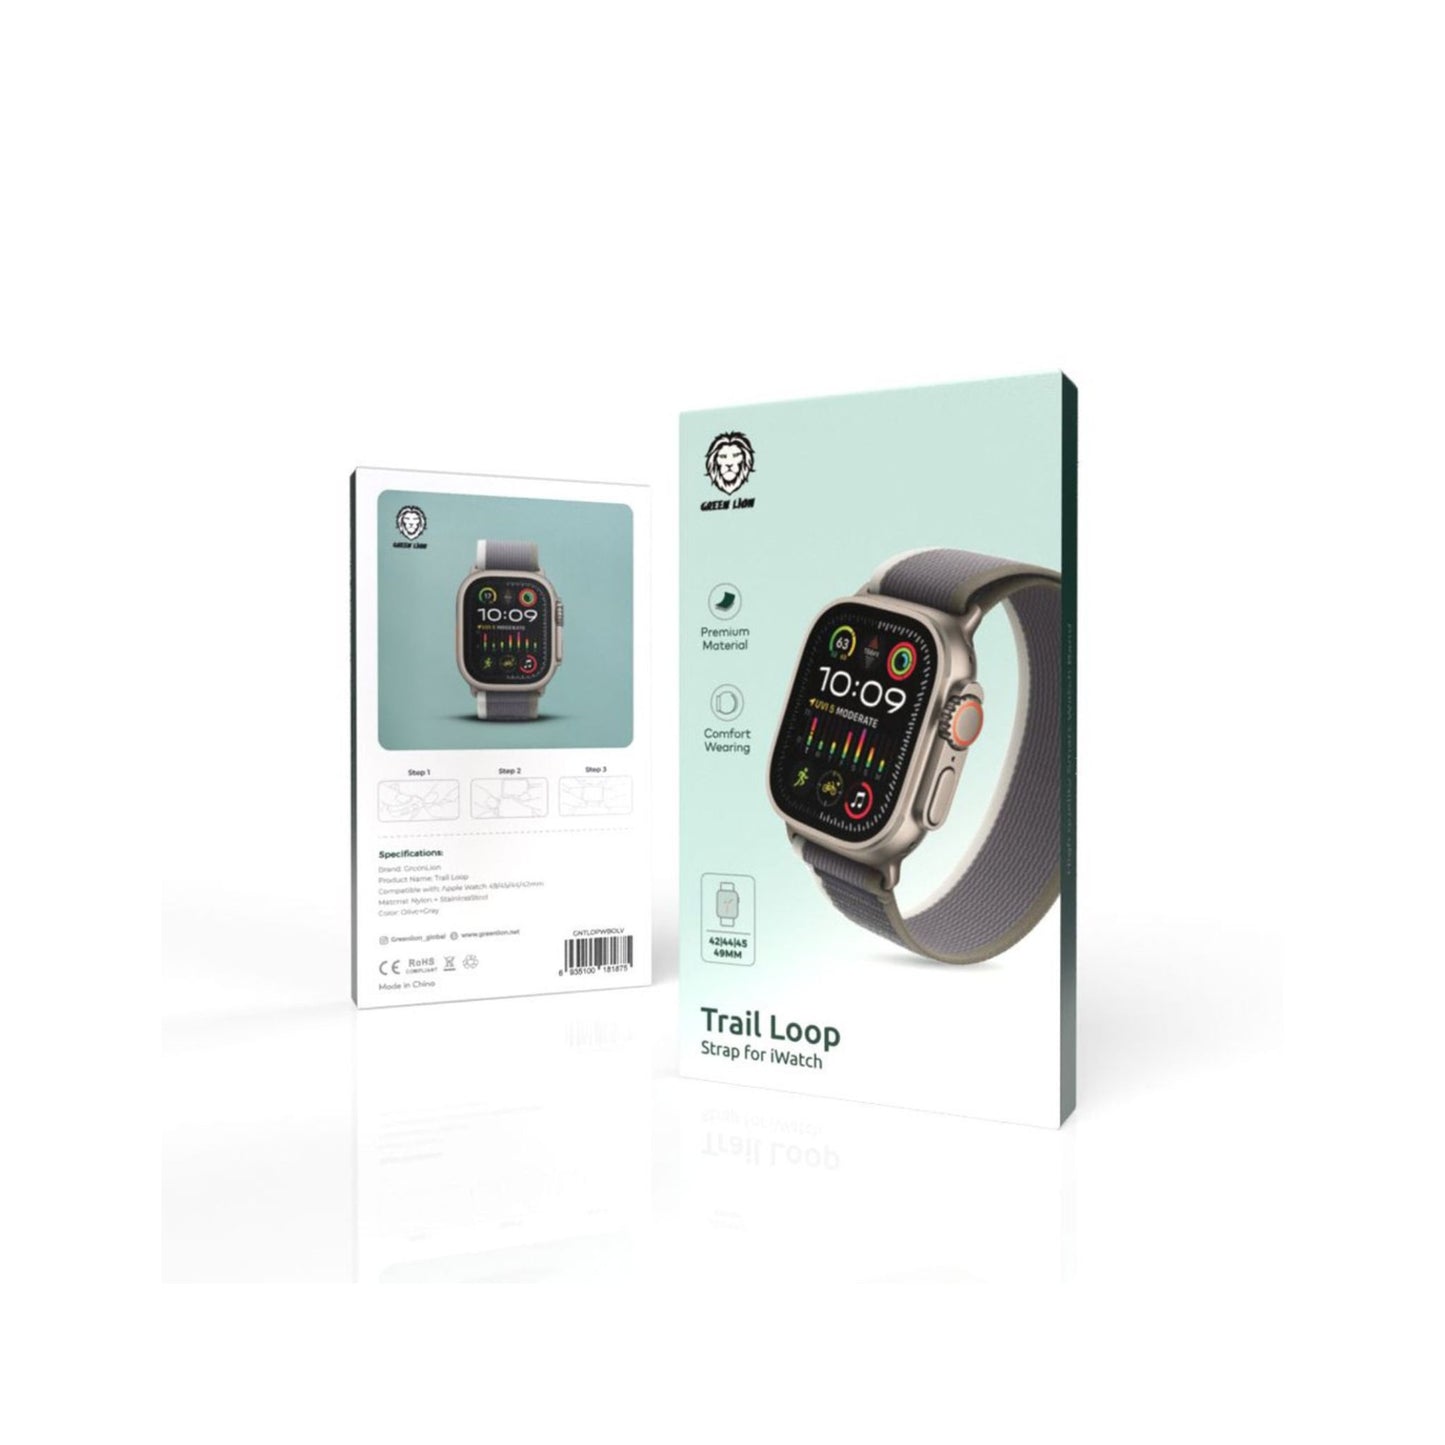 Green Lion Trail Loop Strap For iWatch_Olive+Gray